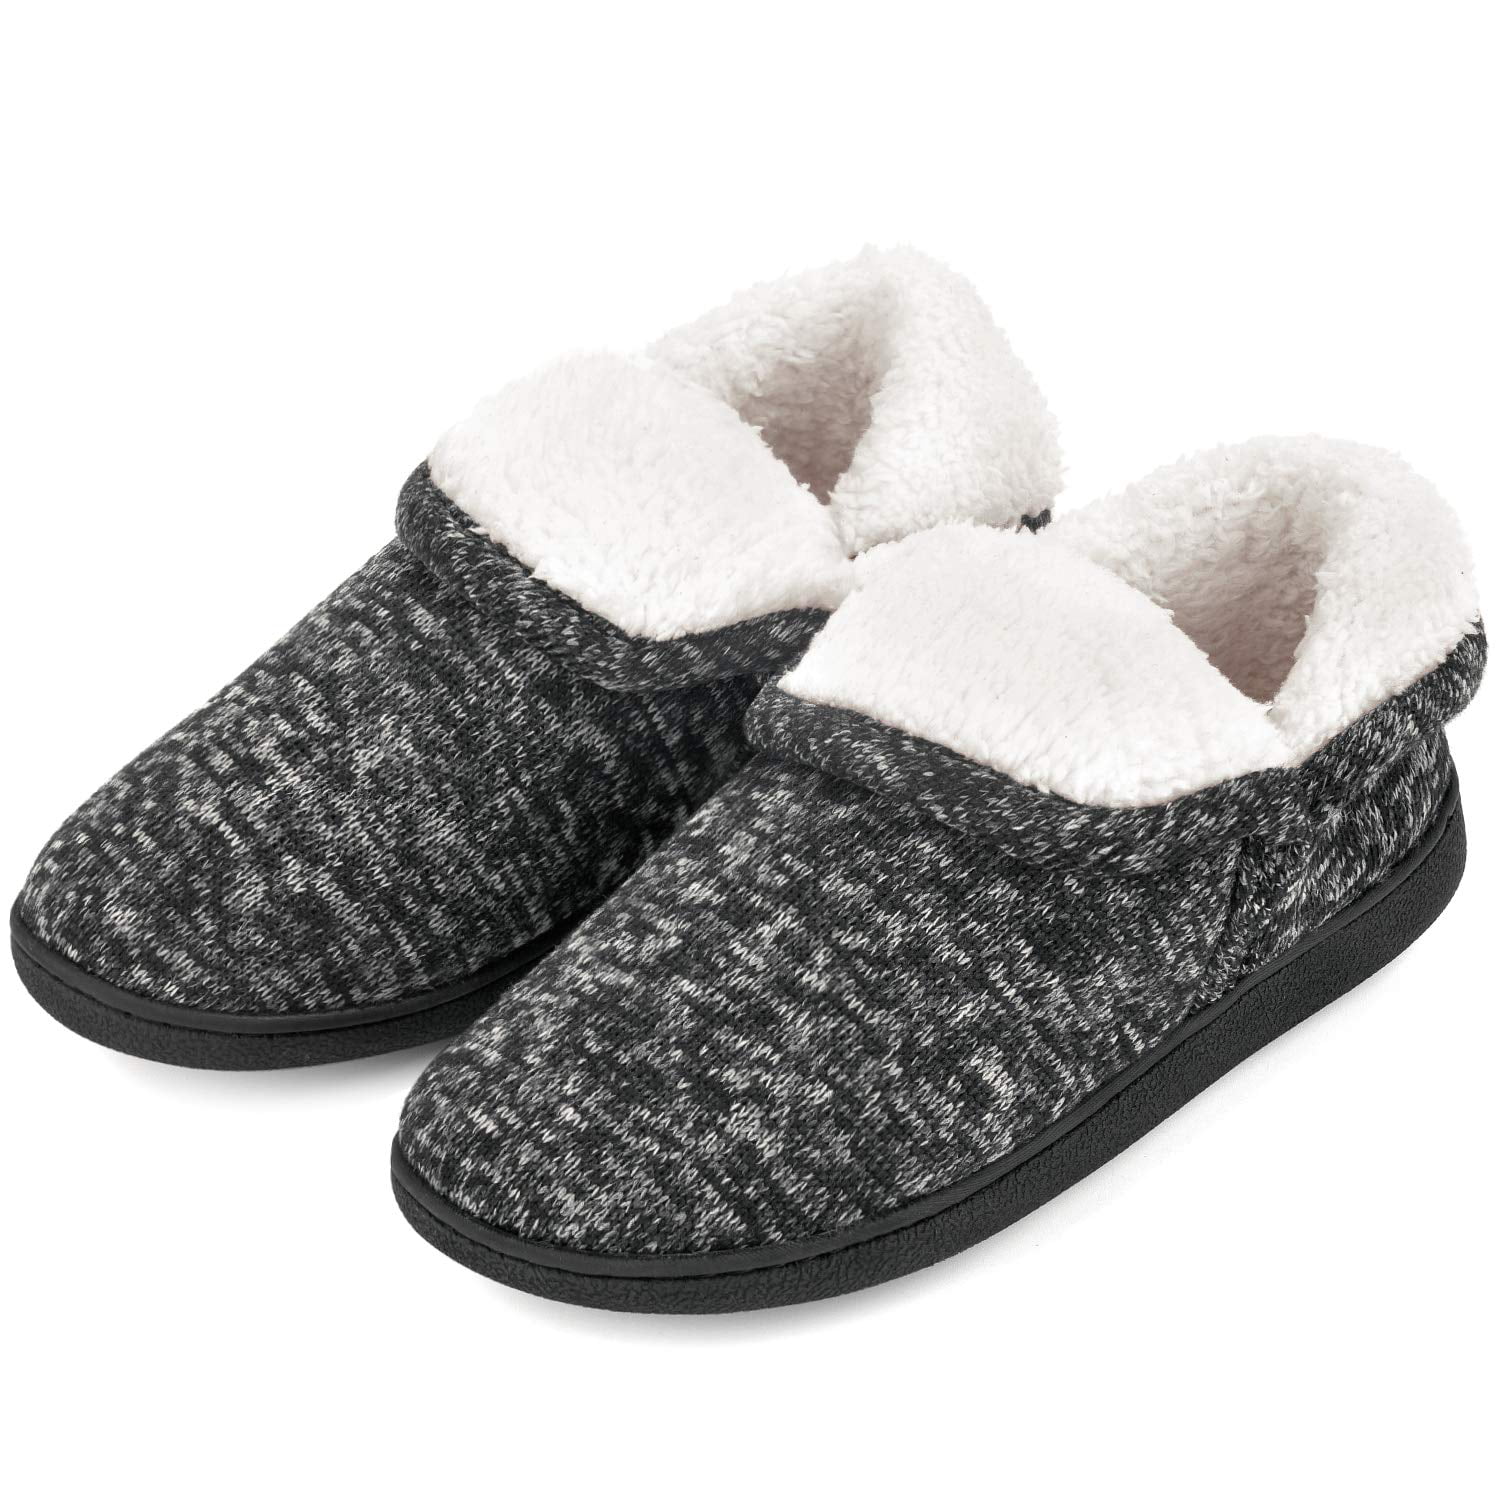 VONMAY - Women's Fuzzy Slippers Boots Memory Foam Booties House Shoes ...